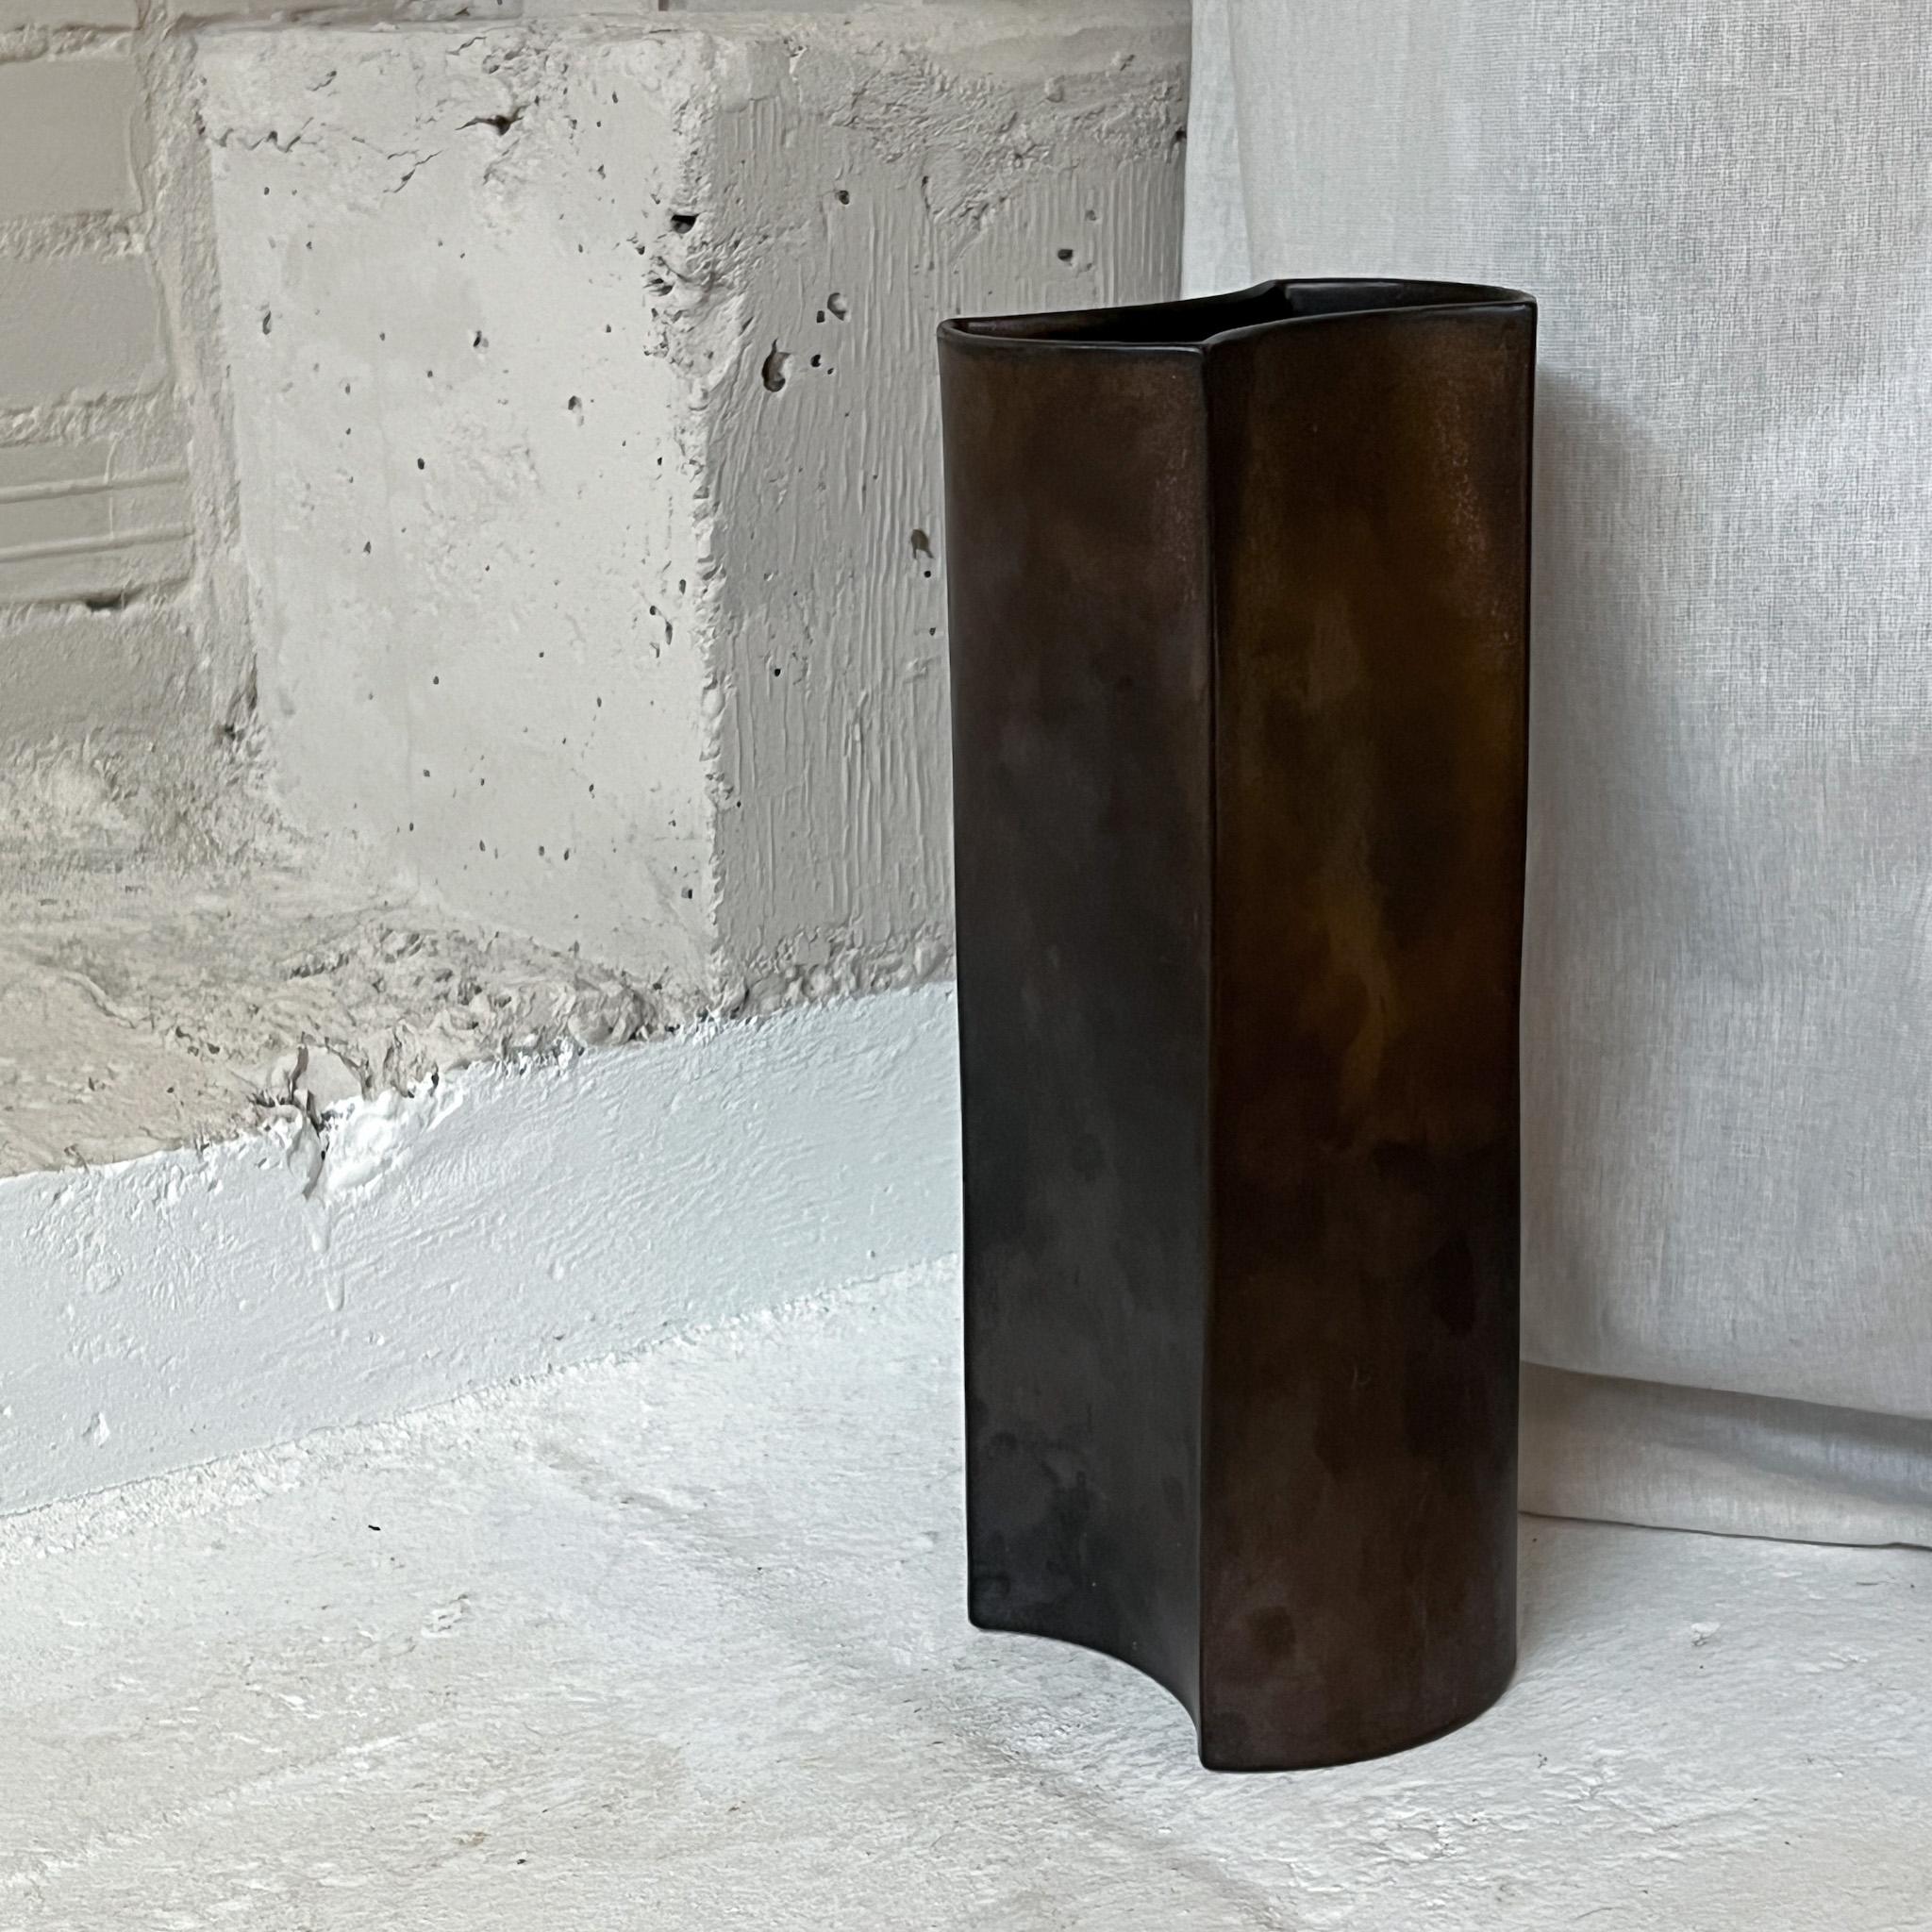 Stunning and rare vase, by Jan van der Vaart. Jan van der Vaart is one of the most influential Dutch ceramists of the 20th century, known as founder of the abstract-geometric ceramics in the Netherlands.This vase with its sleek torsion body a great